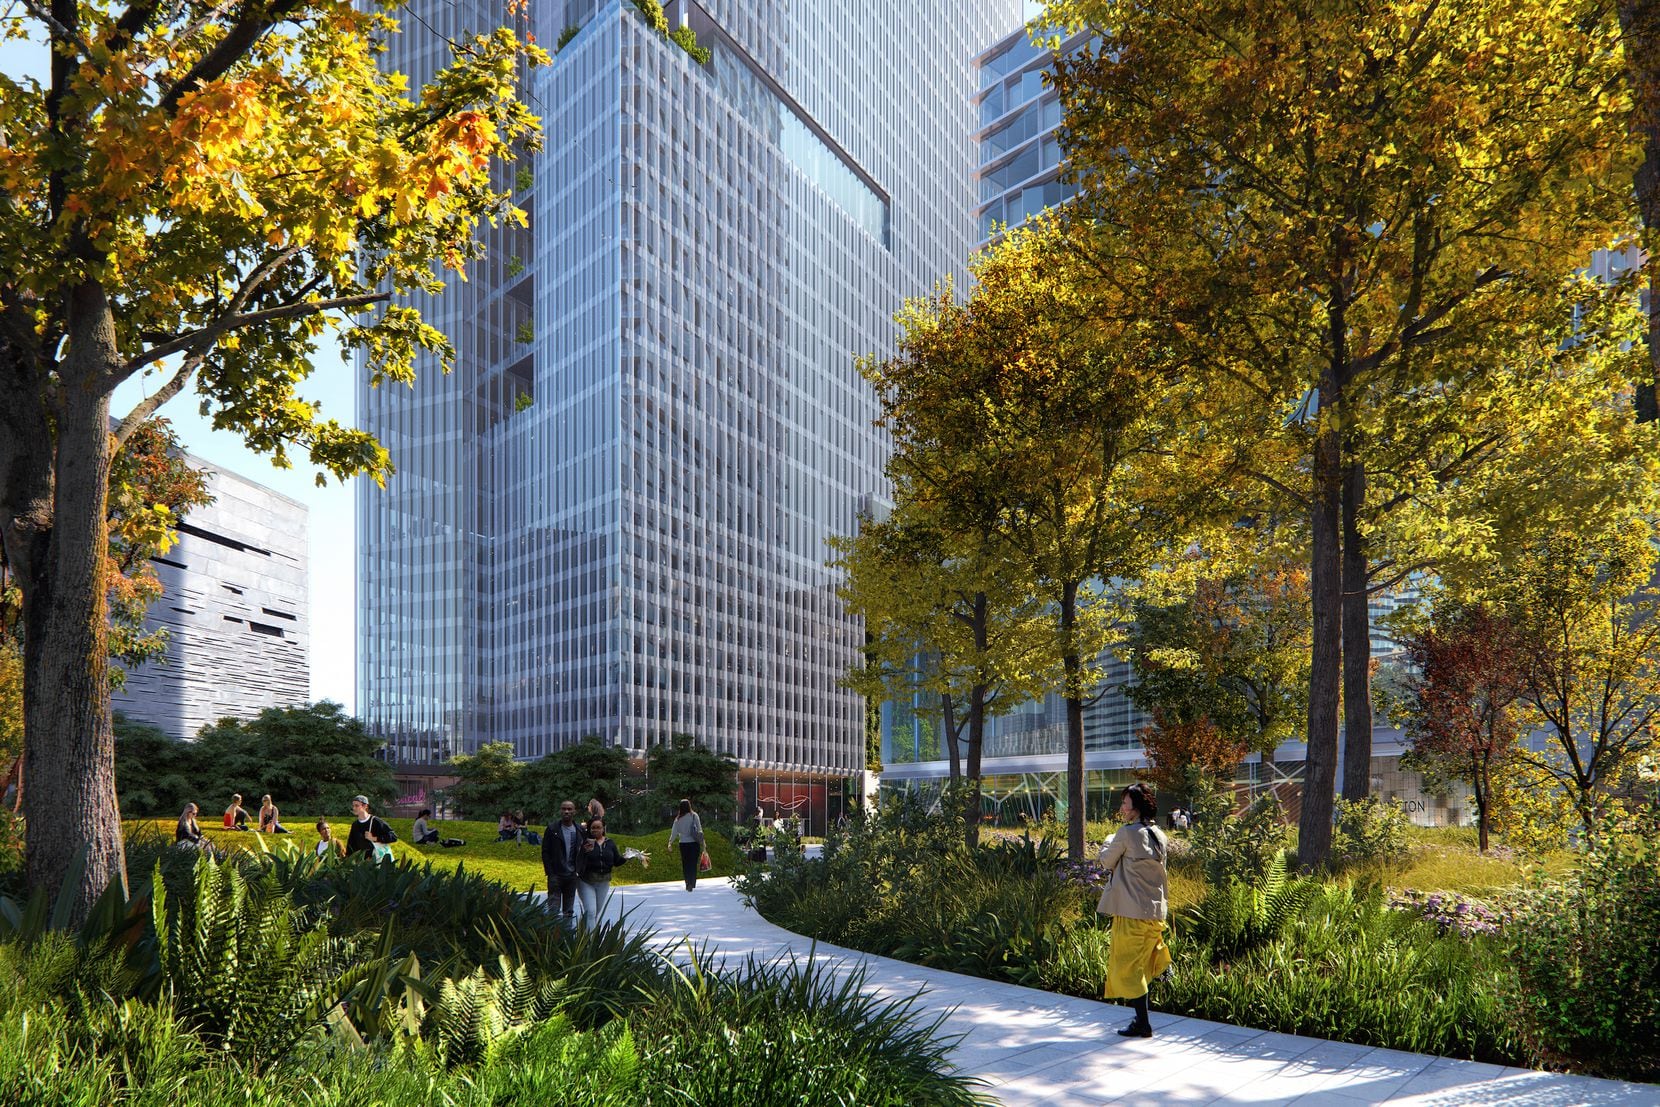 Goldman Sachs plans to put 5,000 workers at Hunt Realty's planned North End development on...